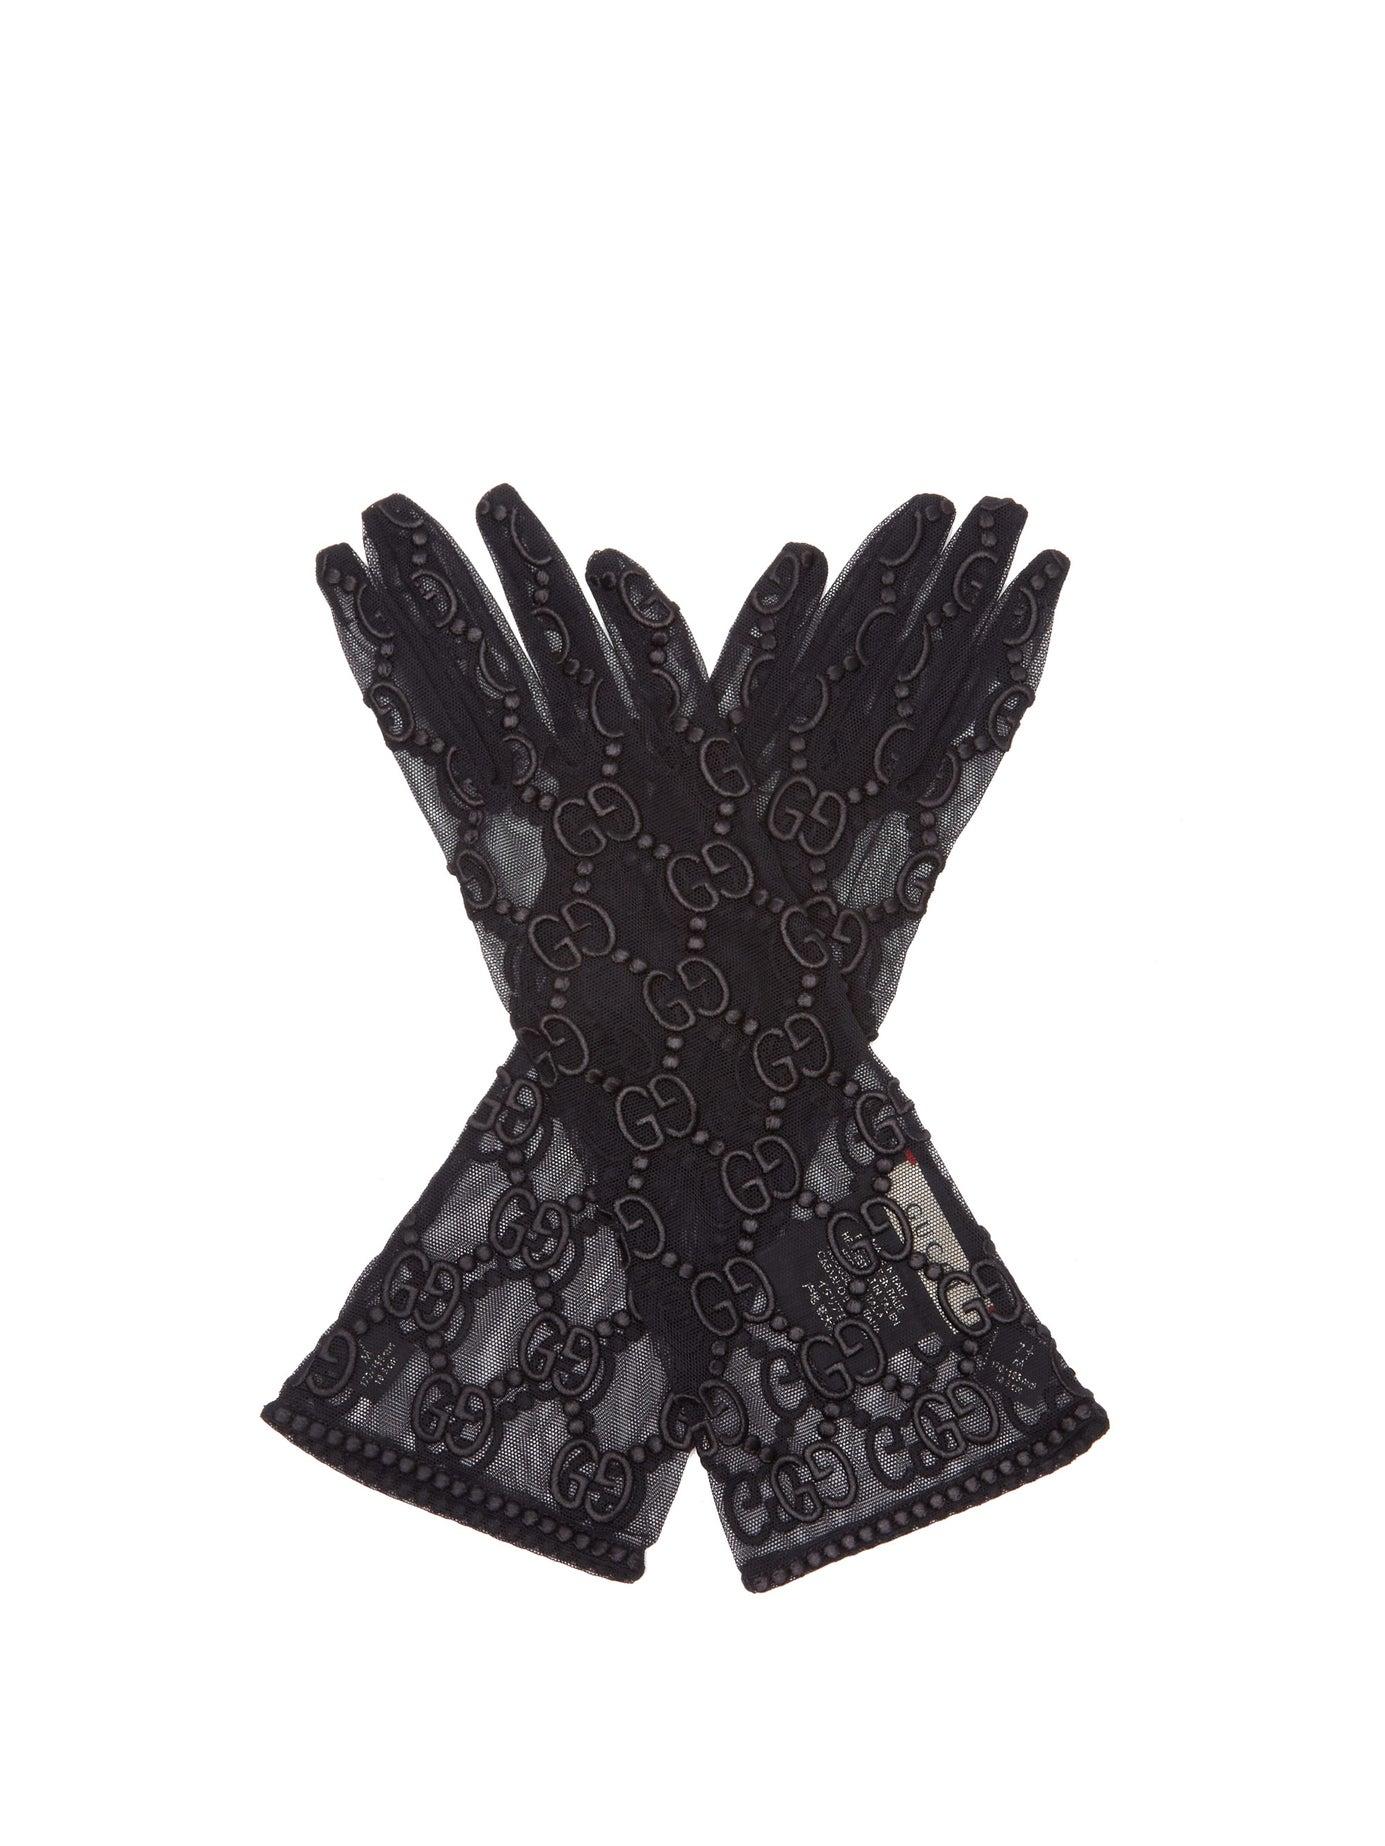 gucci gucci Tulle gloves with symbols embroidery for $290.00 available on  URSTYLE.com